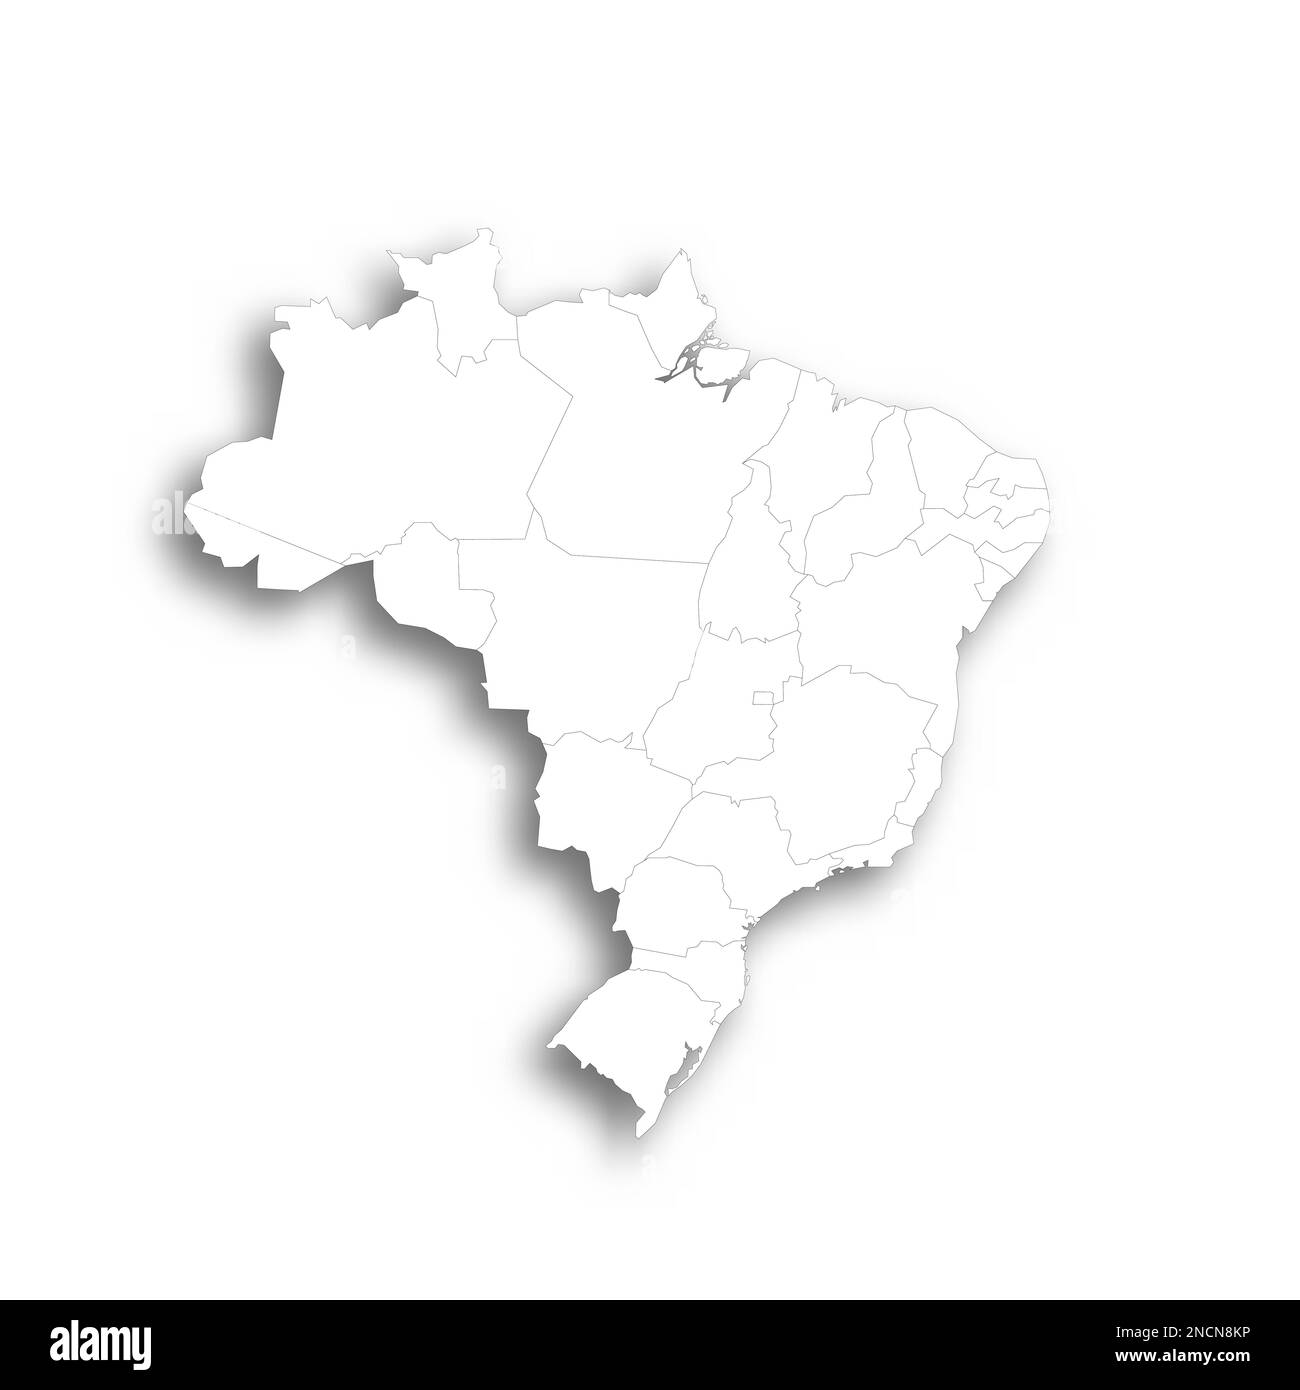 Brazil Political Map Of Administrative Divisions Federative Units Of